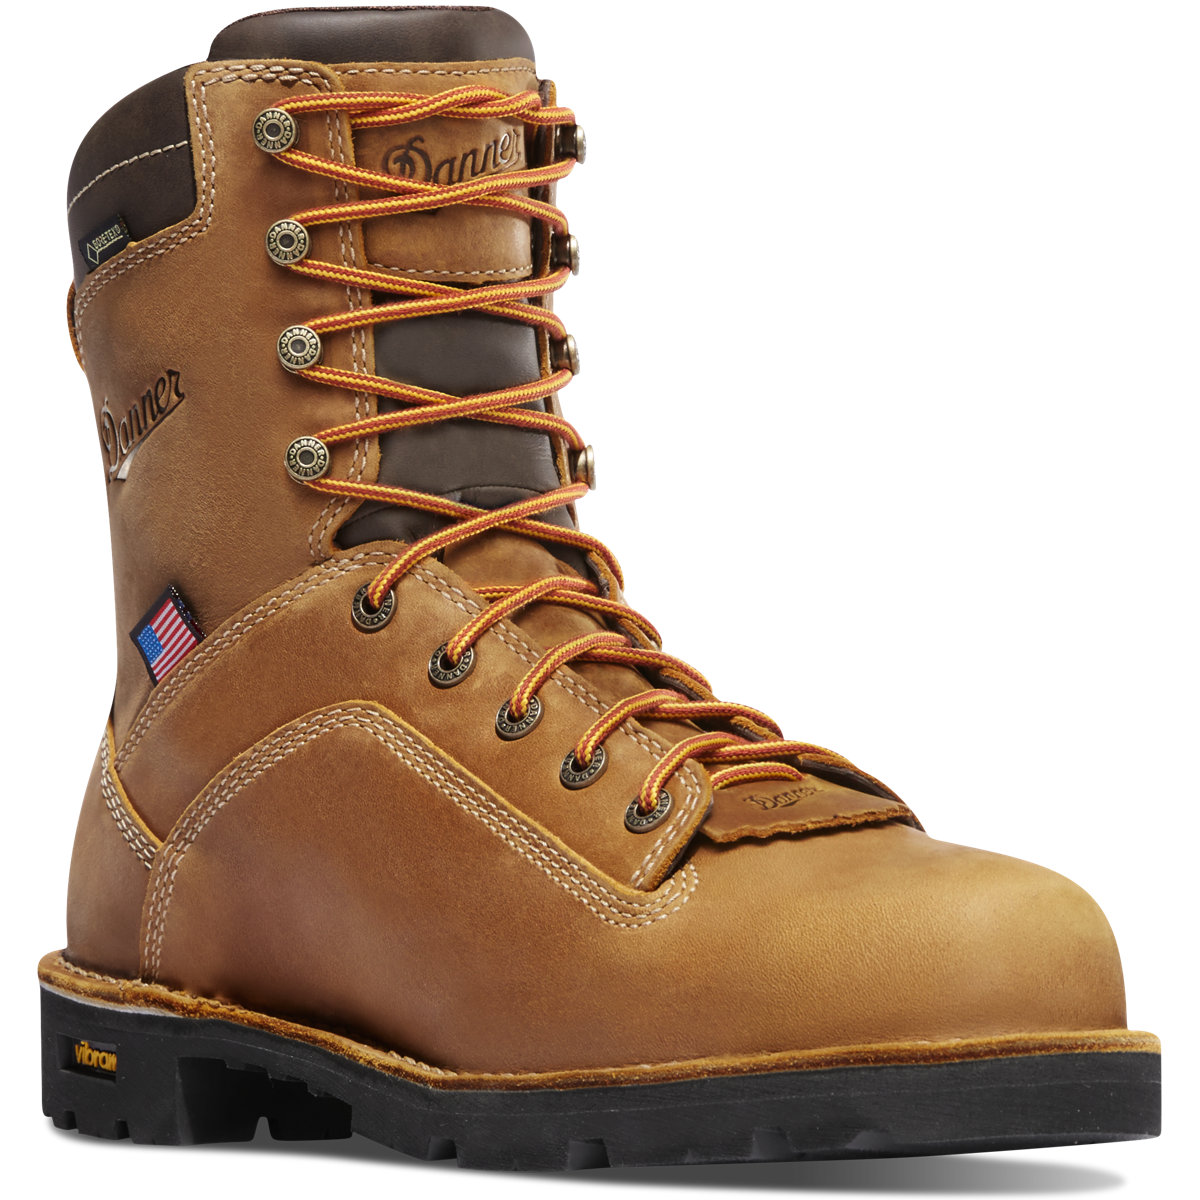 Danner - Quarry USA Distressed Brown Insulated 400G Composite Toe 